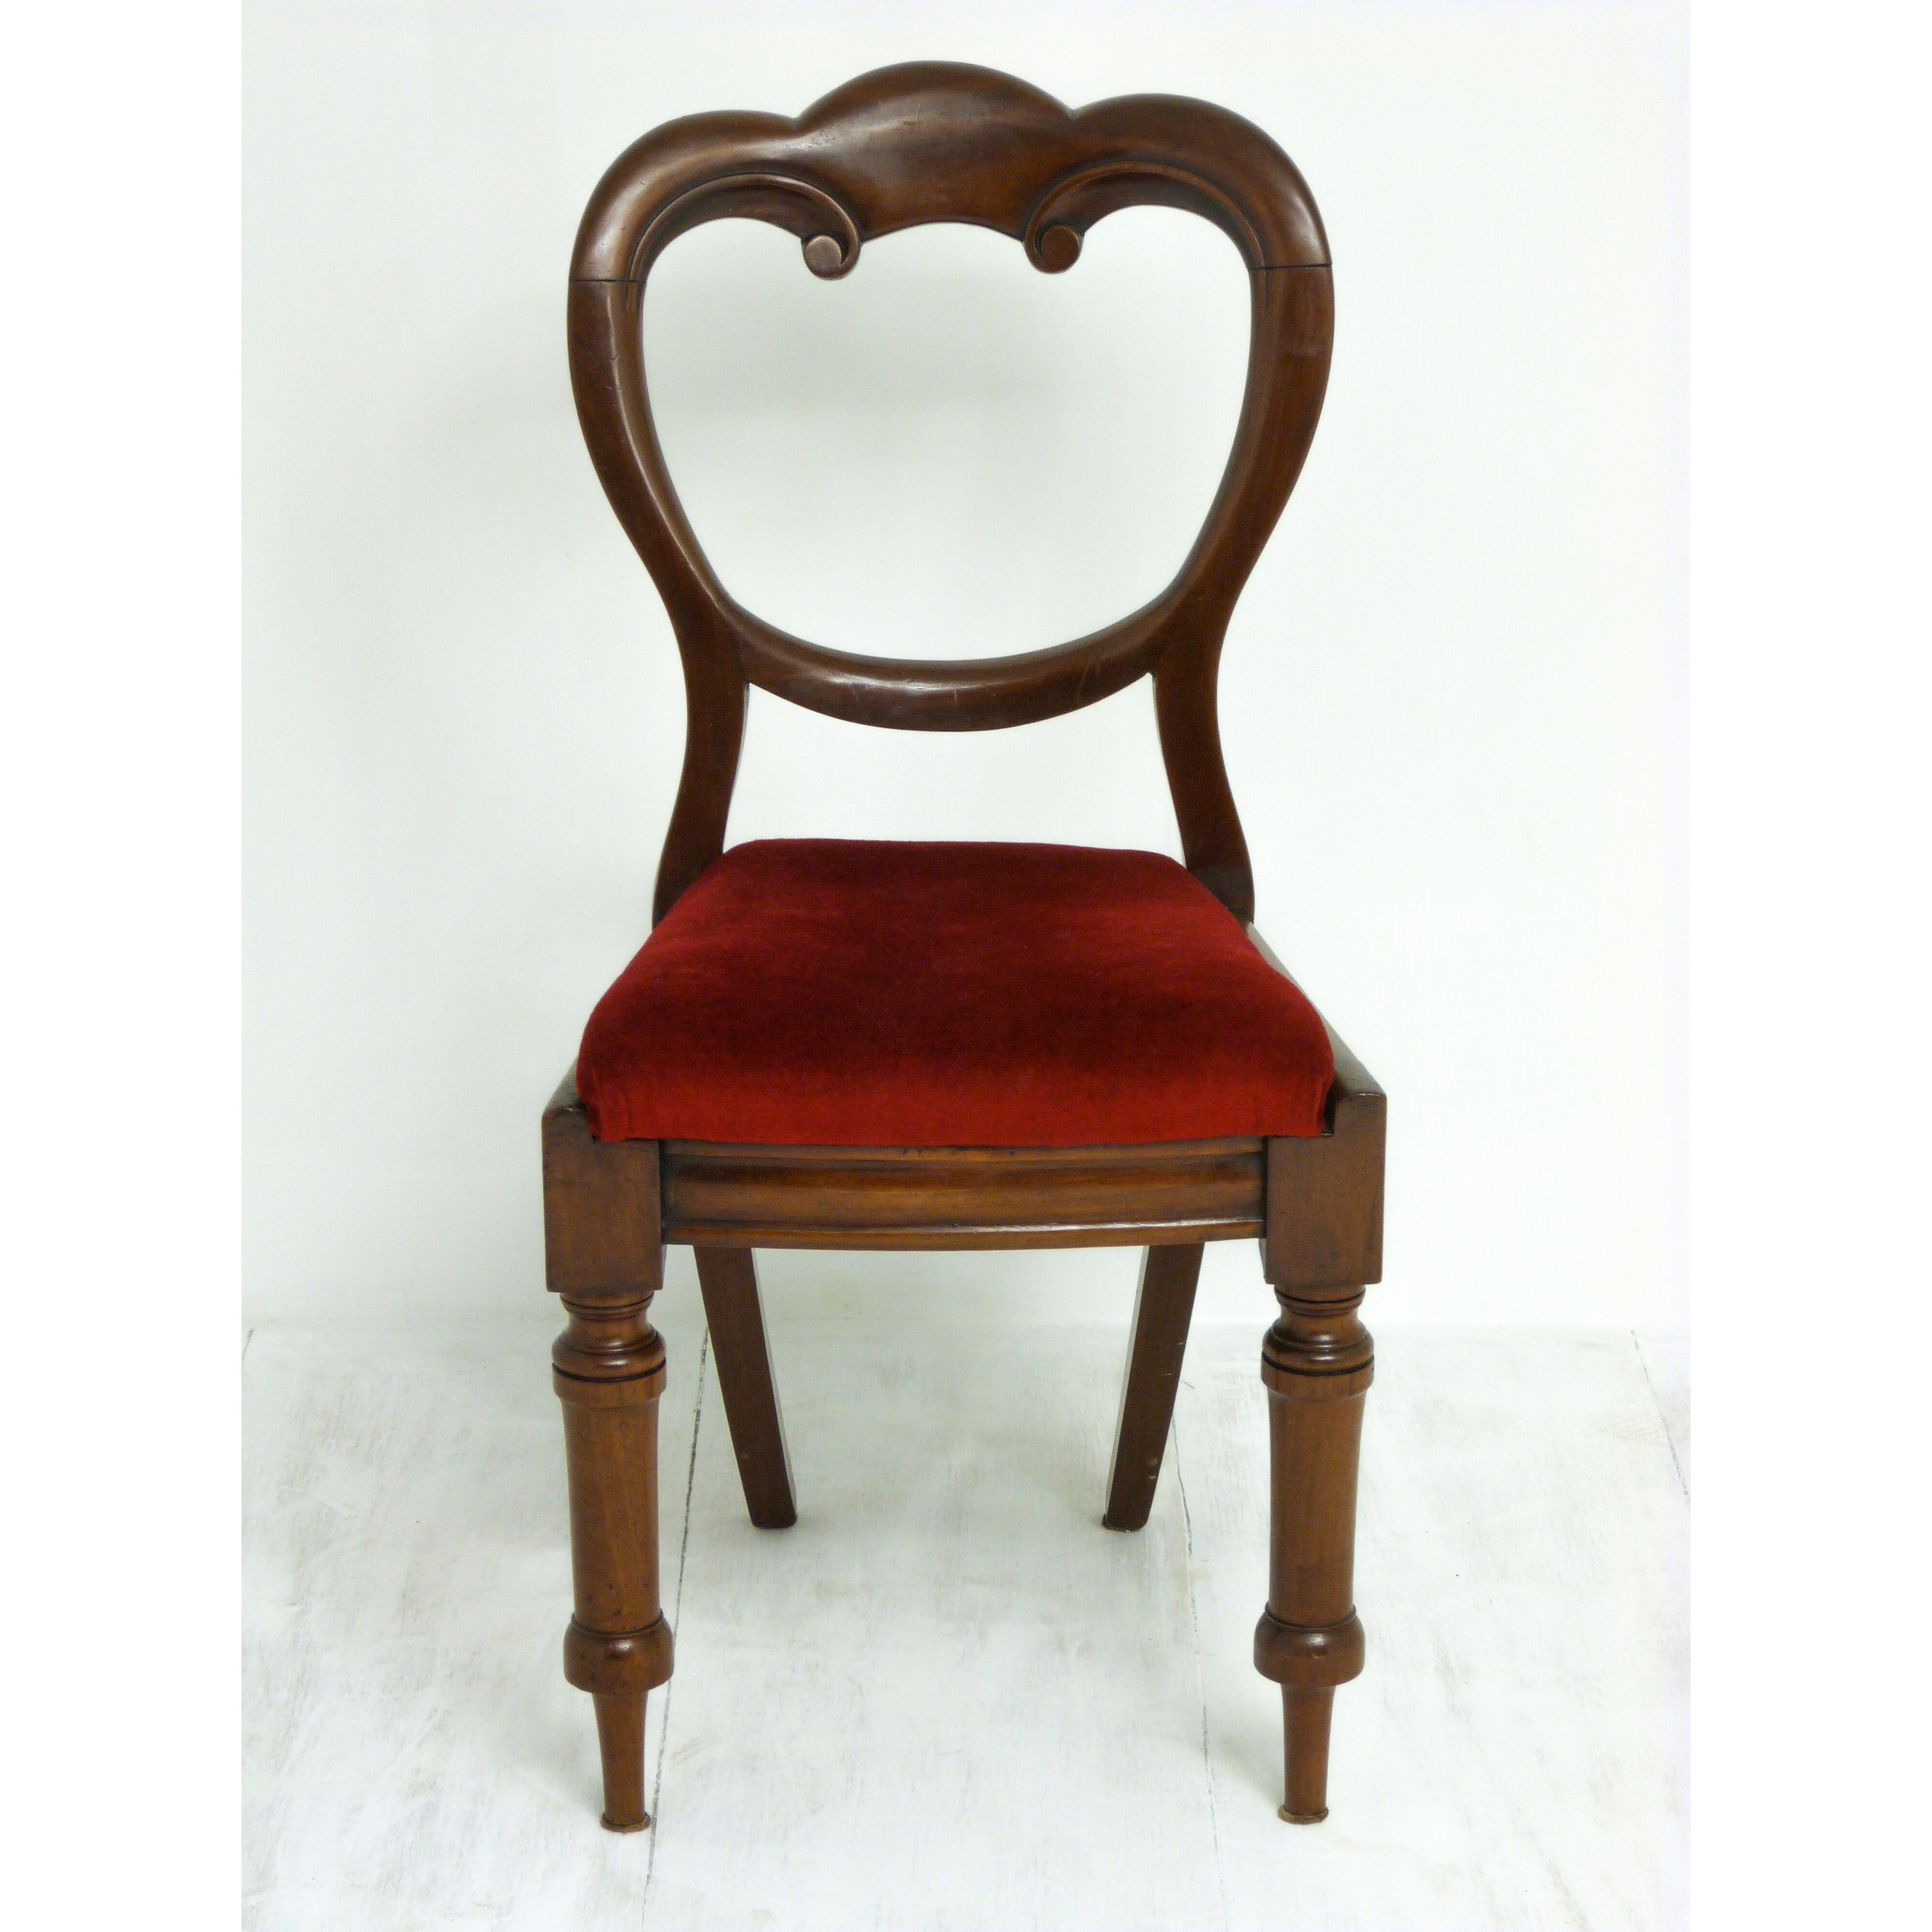 A lovely set of six Victorian mahogany balloon back chairs. These are traditional and attractive chairs will a shapely top rail and slightly bowed seat front and above turned front legs and splayed rear legs. With only one small old repair to the